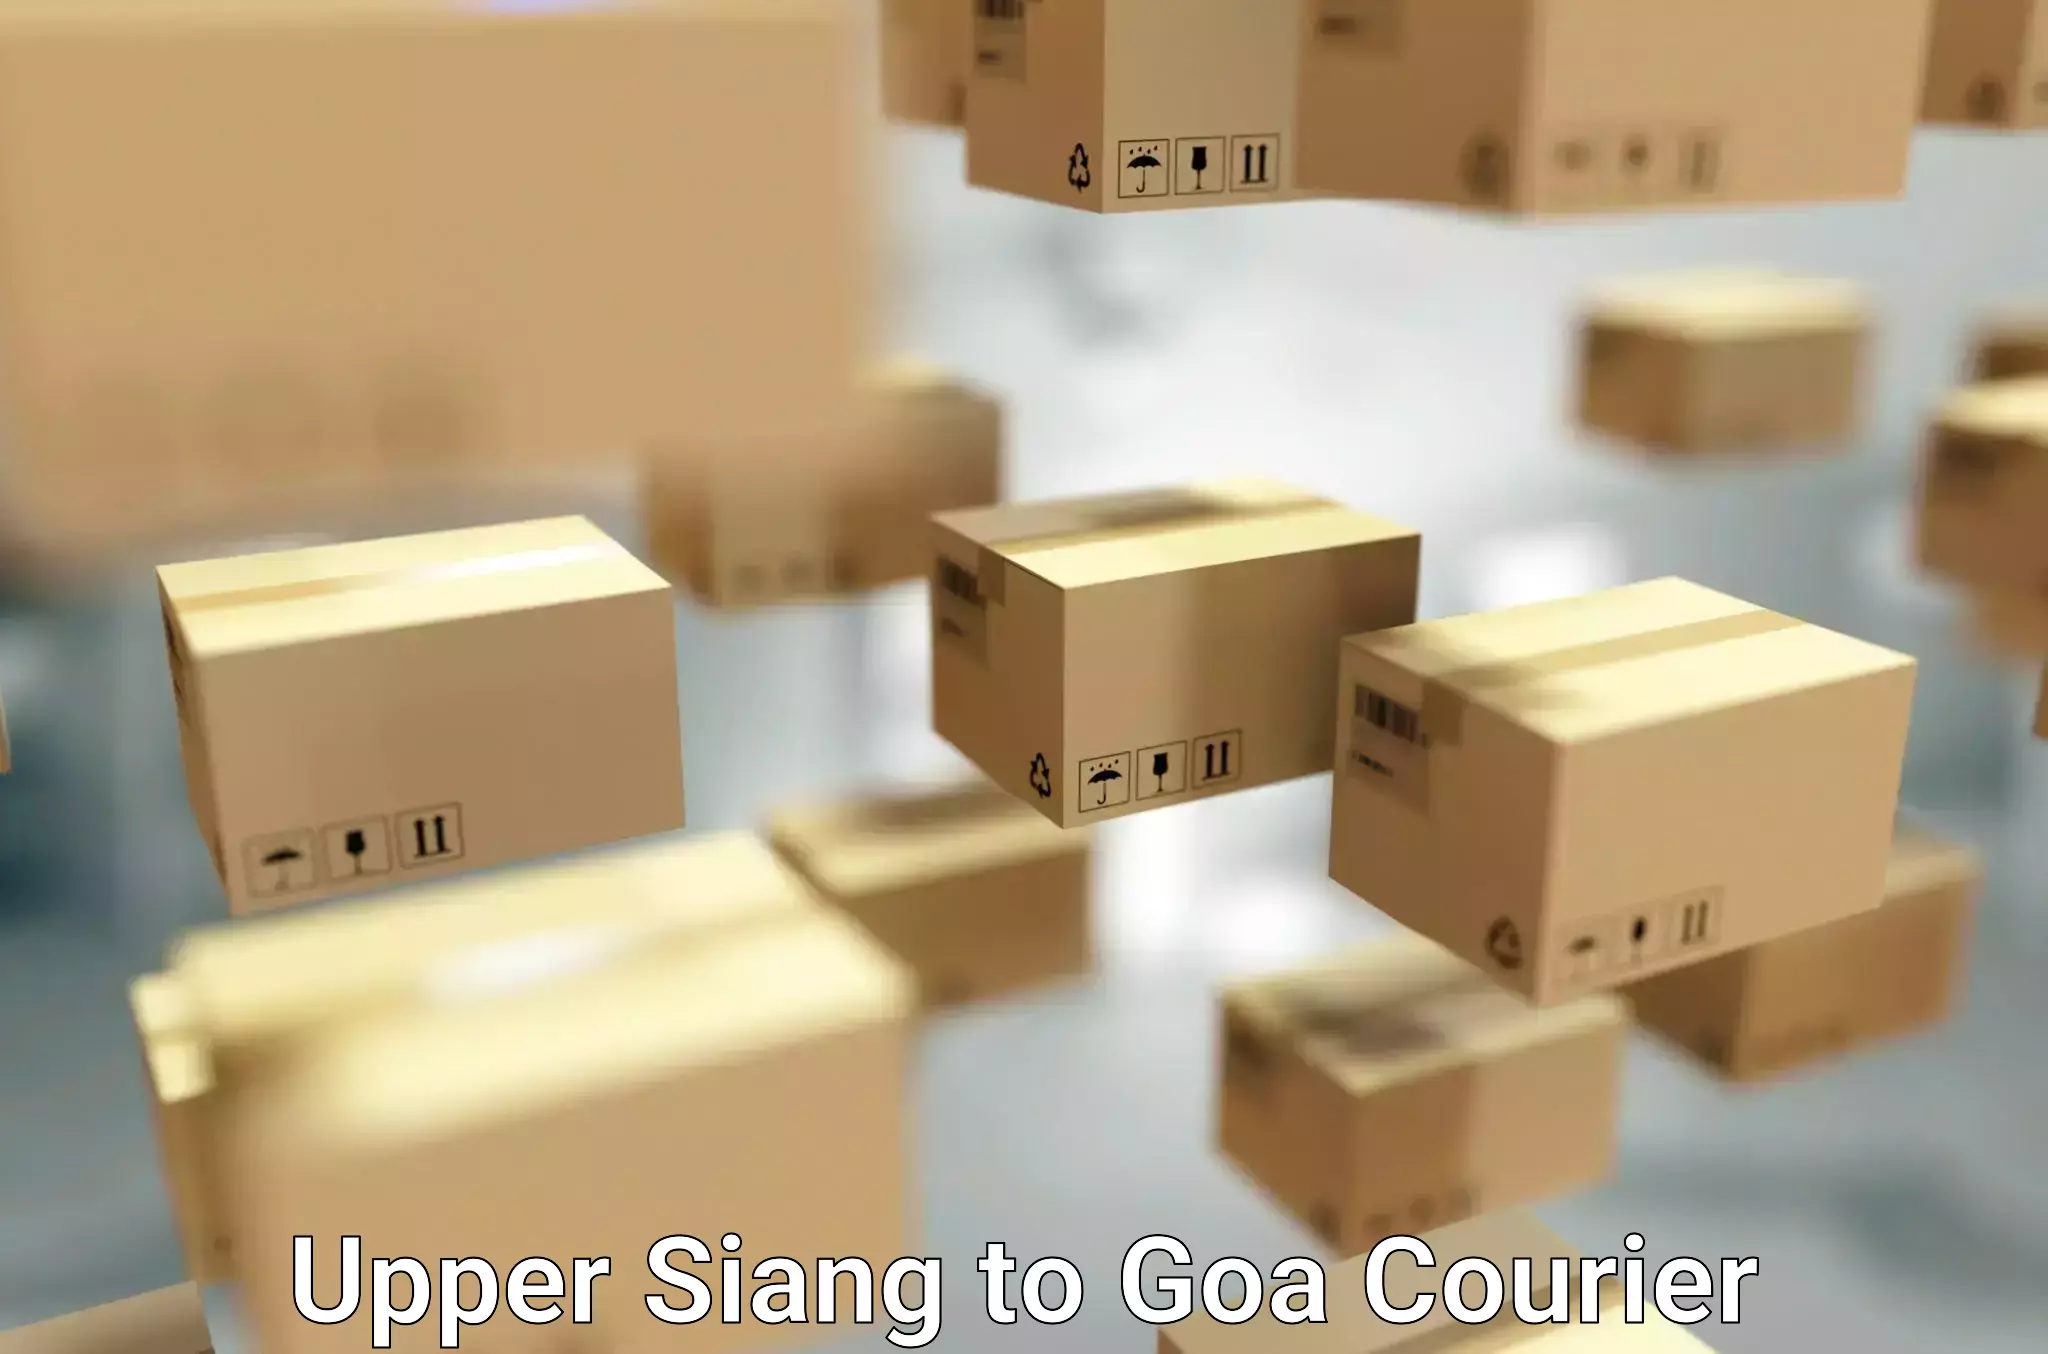 Professional moving company Upper Siang to Goa